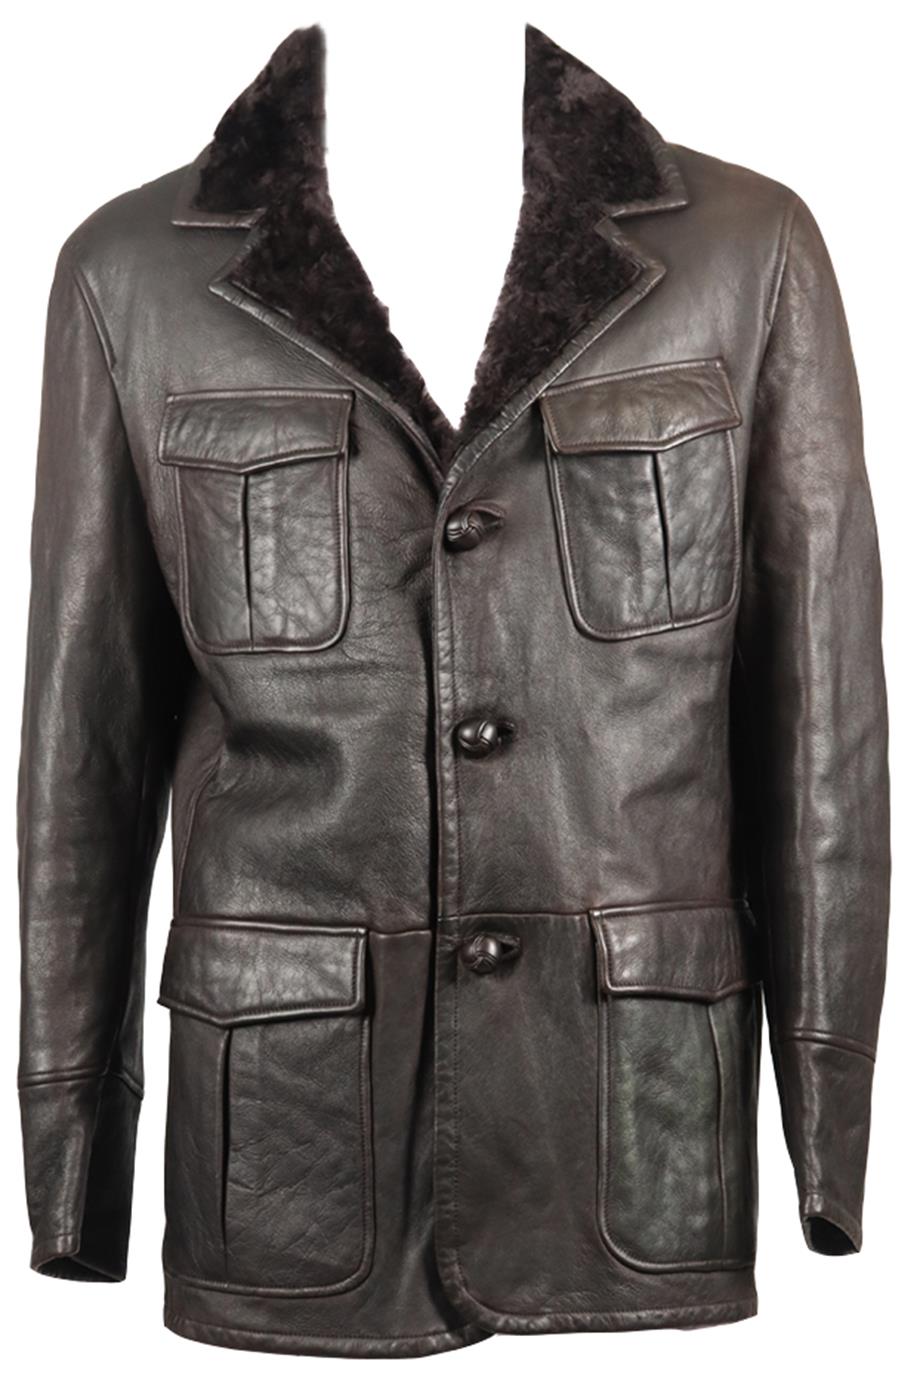 GUCCI MEN'S SHEARLING AND LEATHER COAT IT 54 UK/US CHEST 44